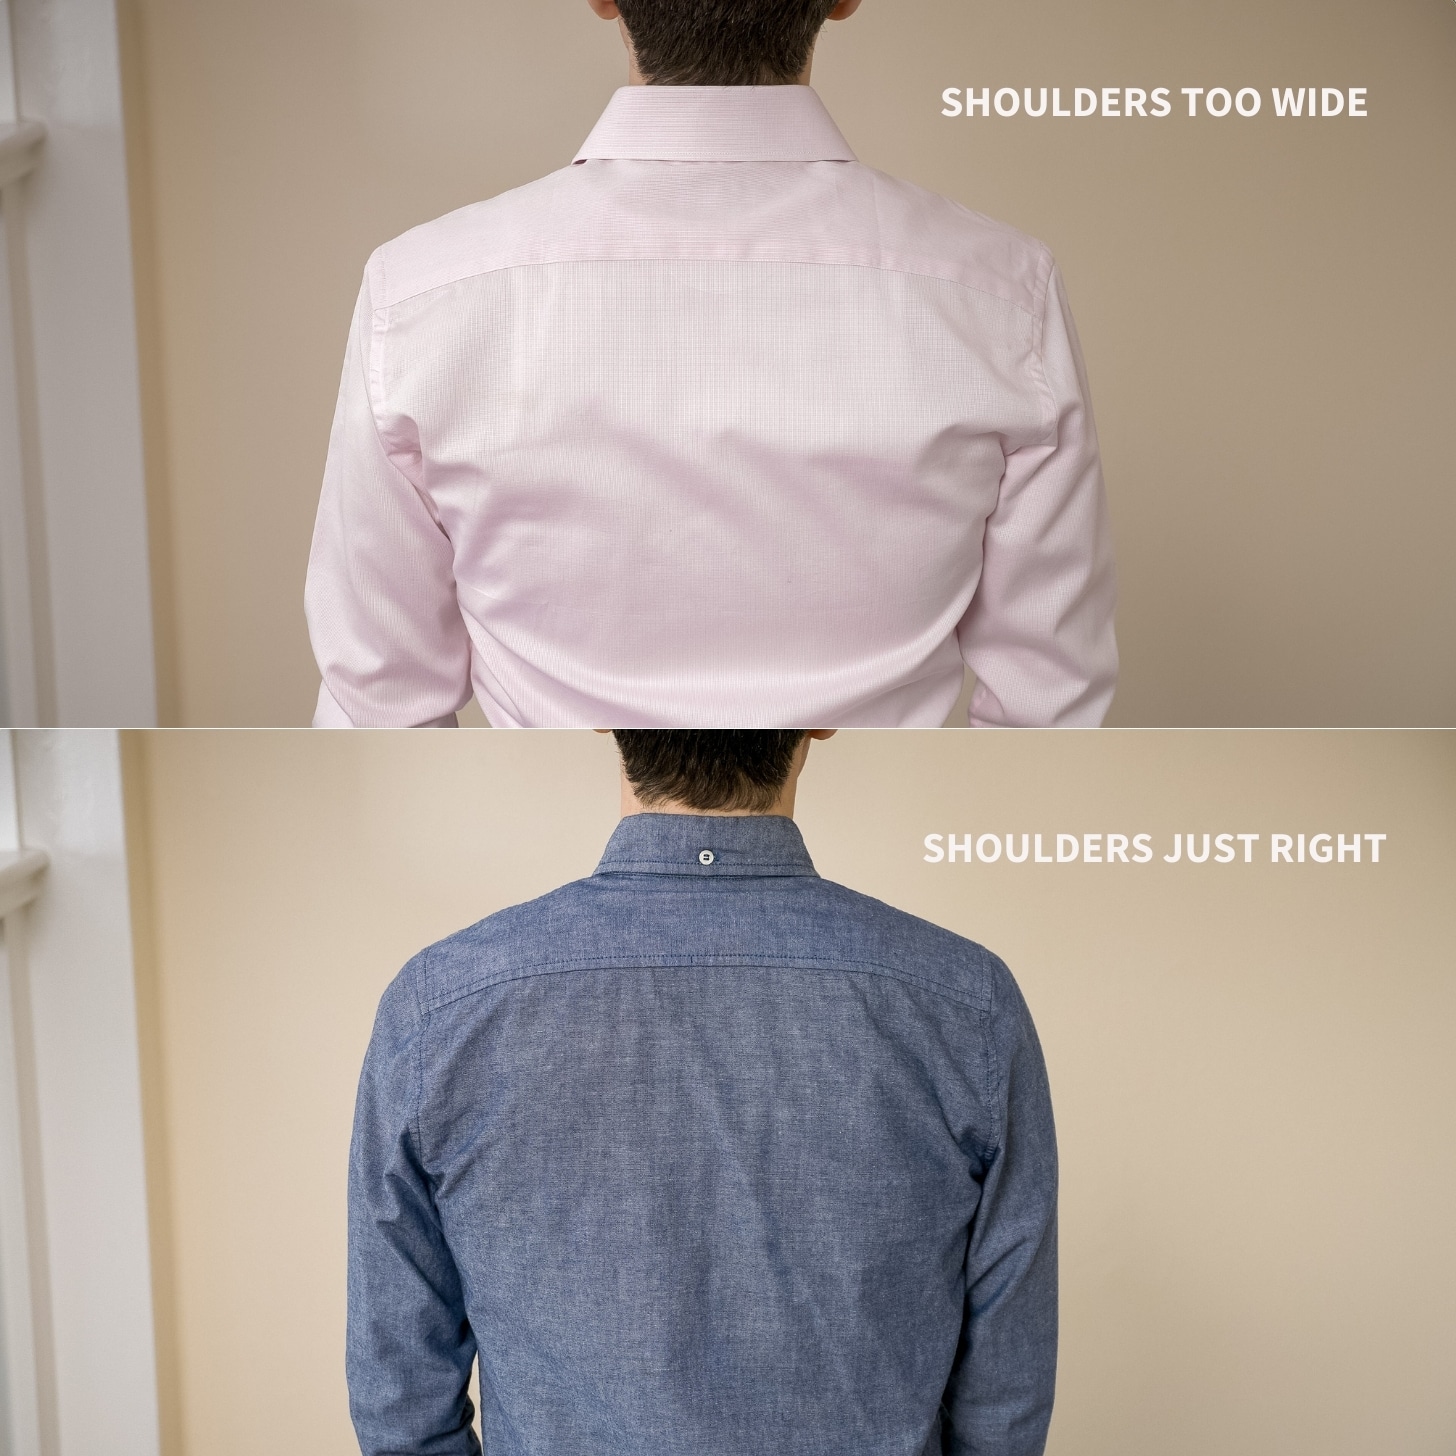 Button-Up Shirts 101: Terminology, Fit Facts, and More